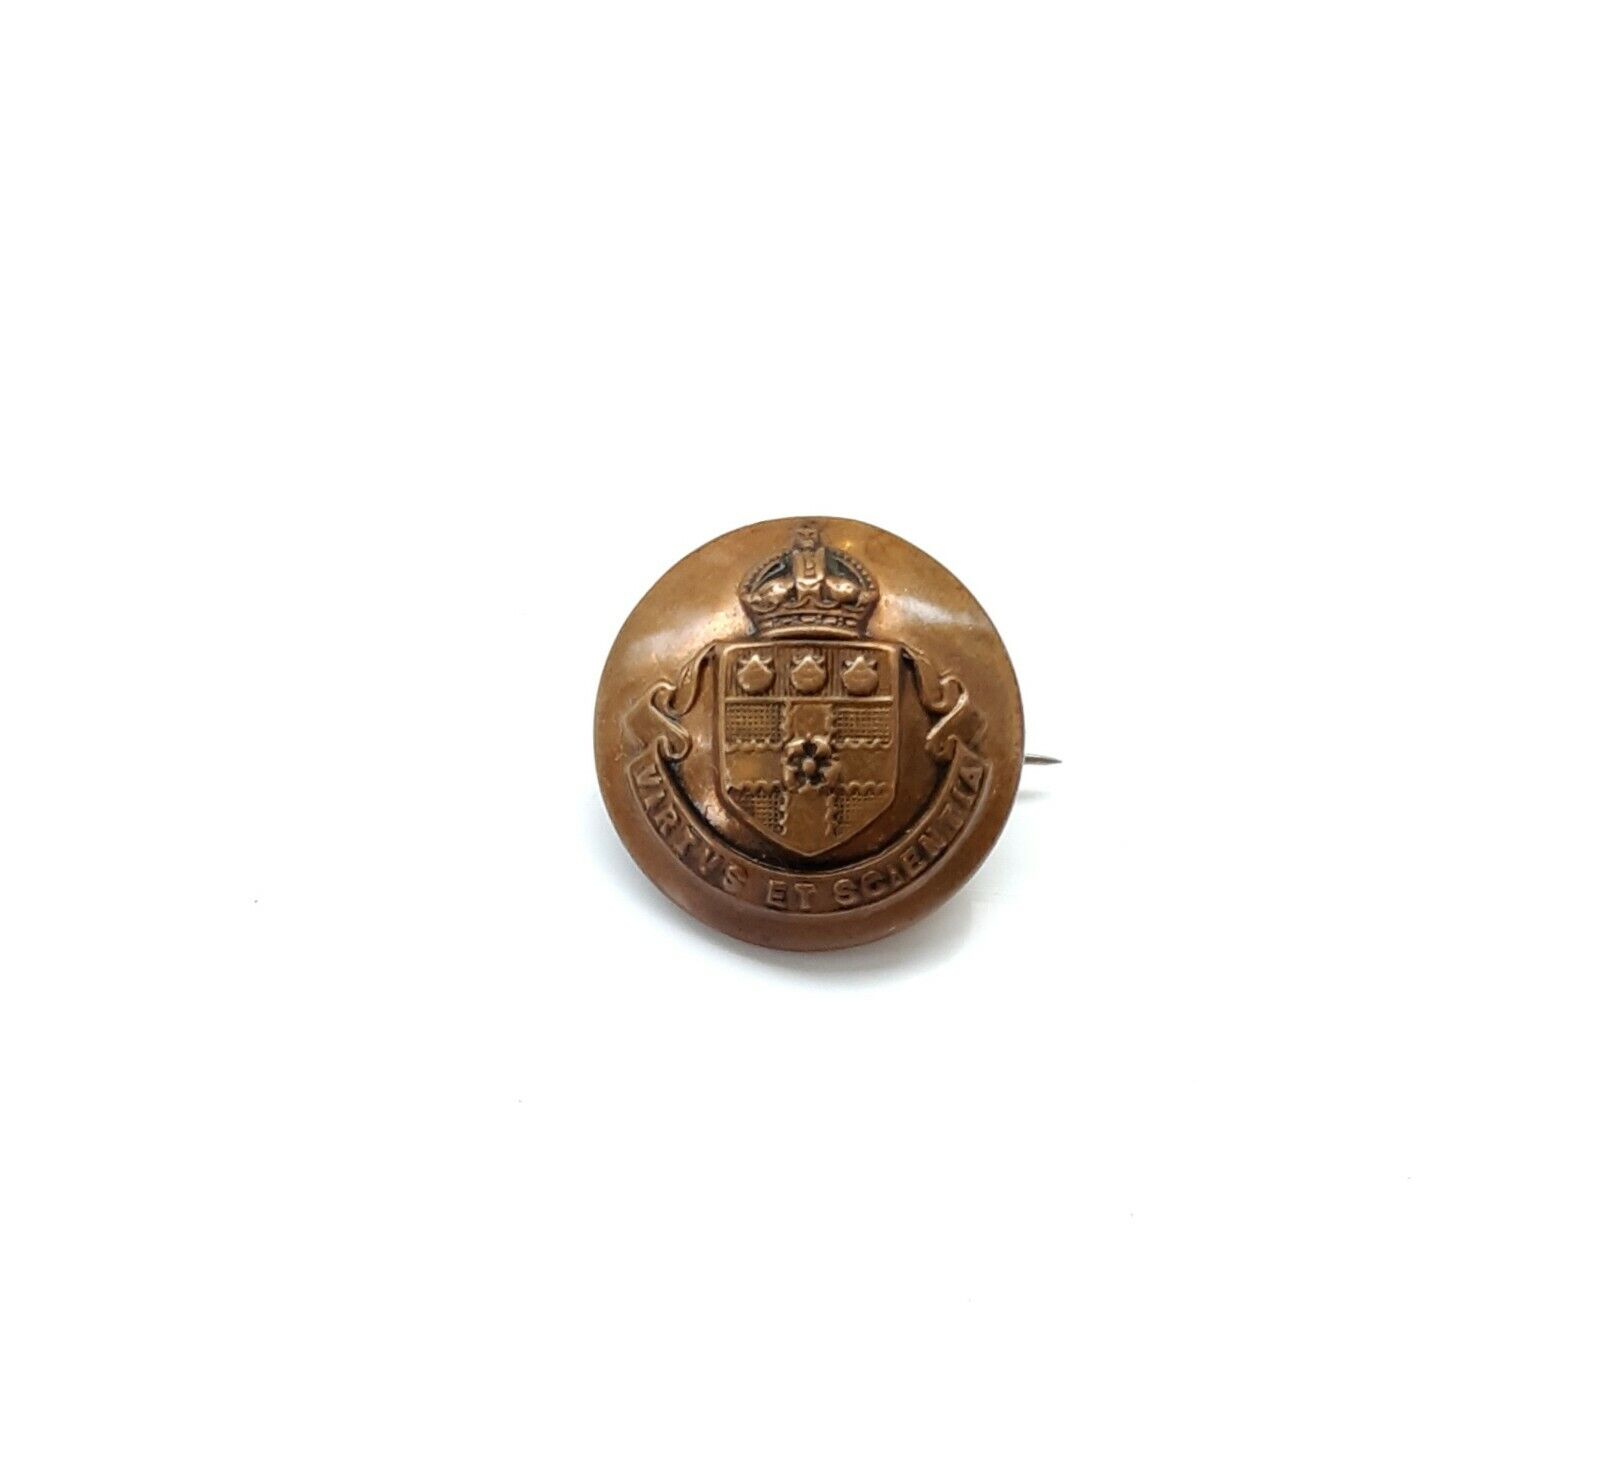 WW1 Brass Trench Art Badge - Converted From a Button - Knowledge Is Power Motto